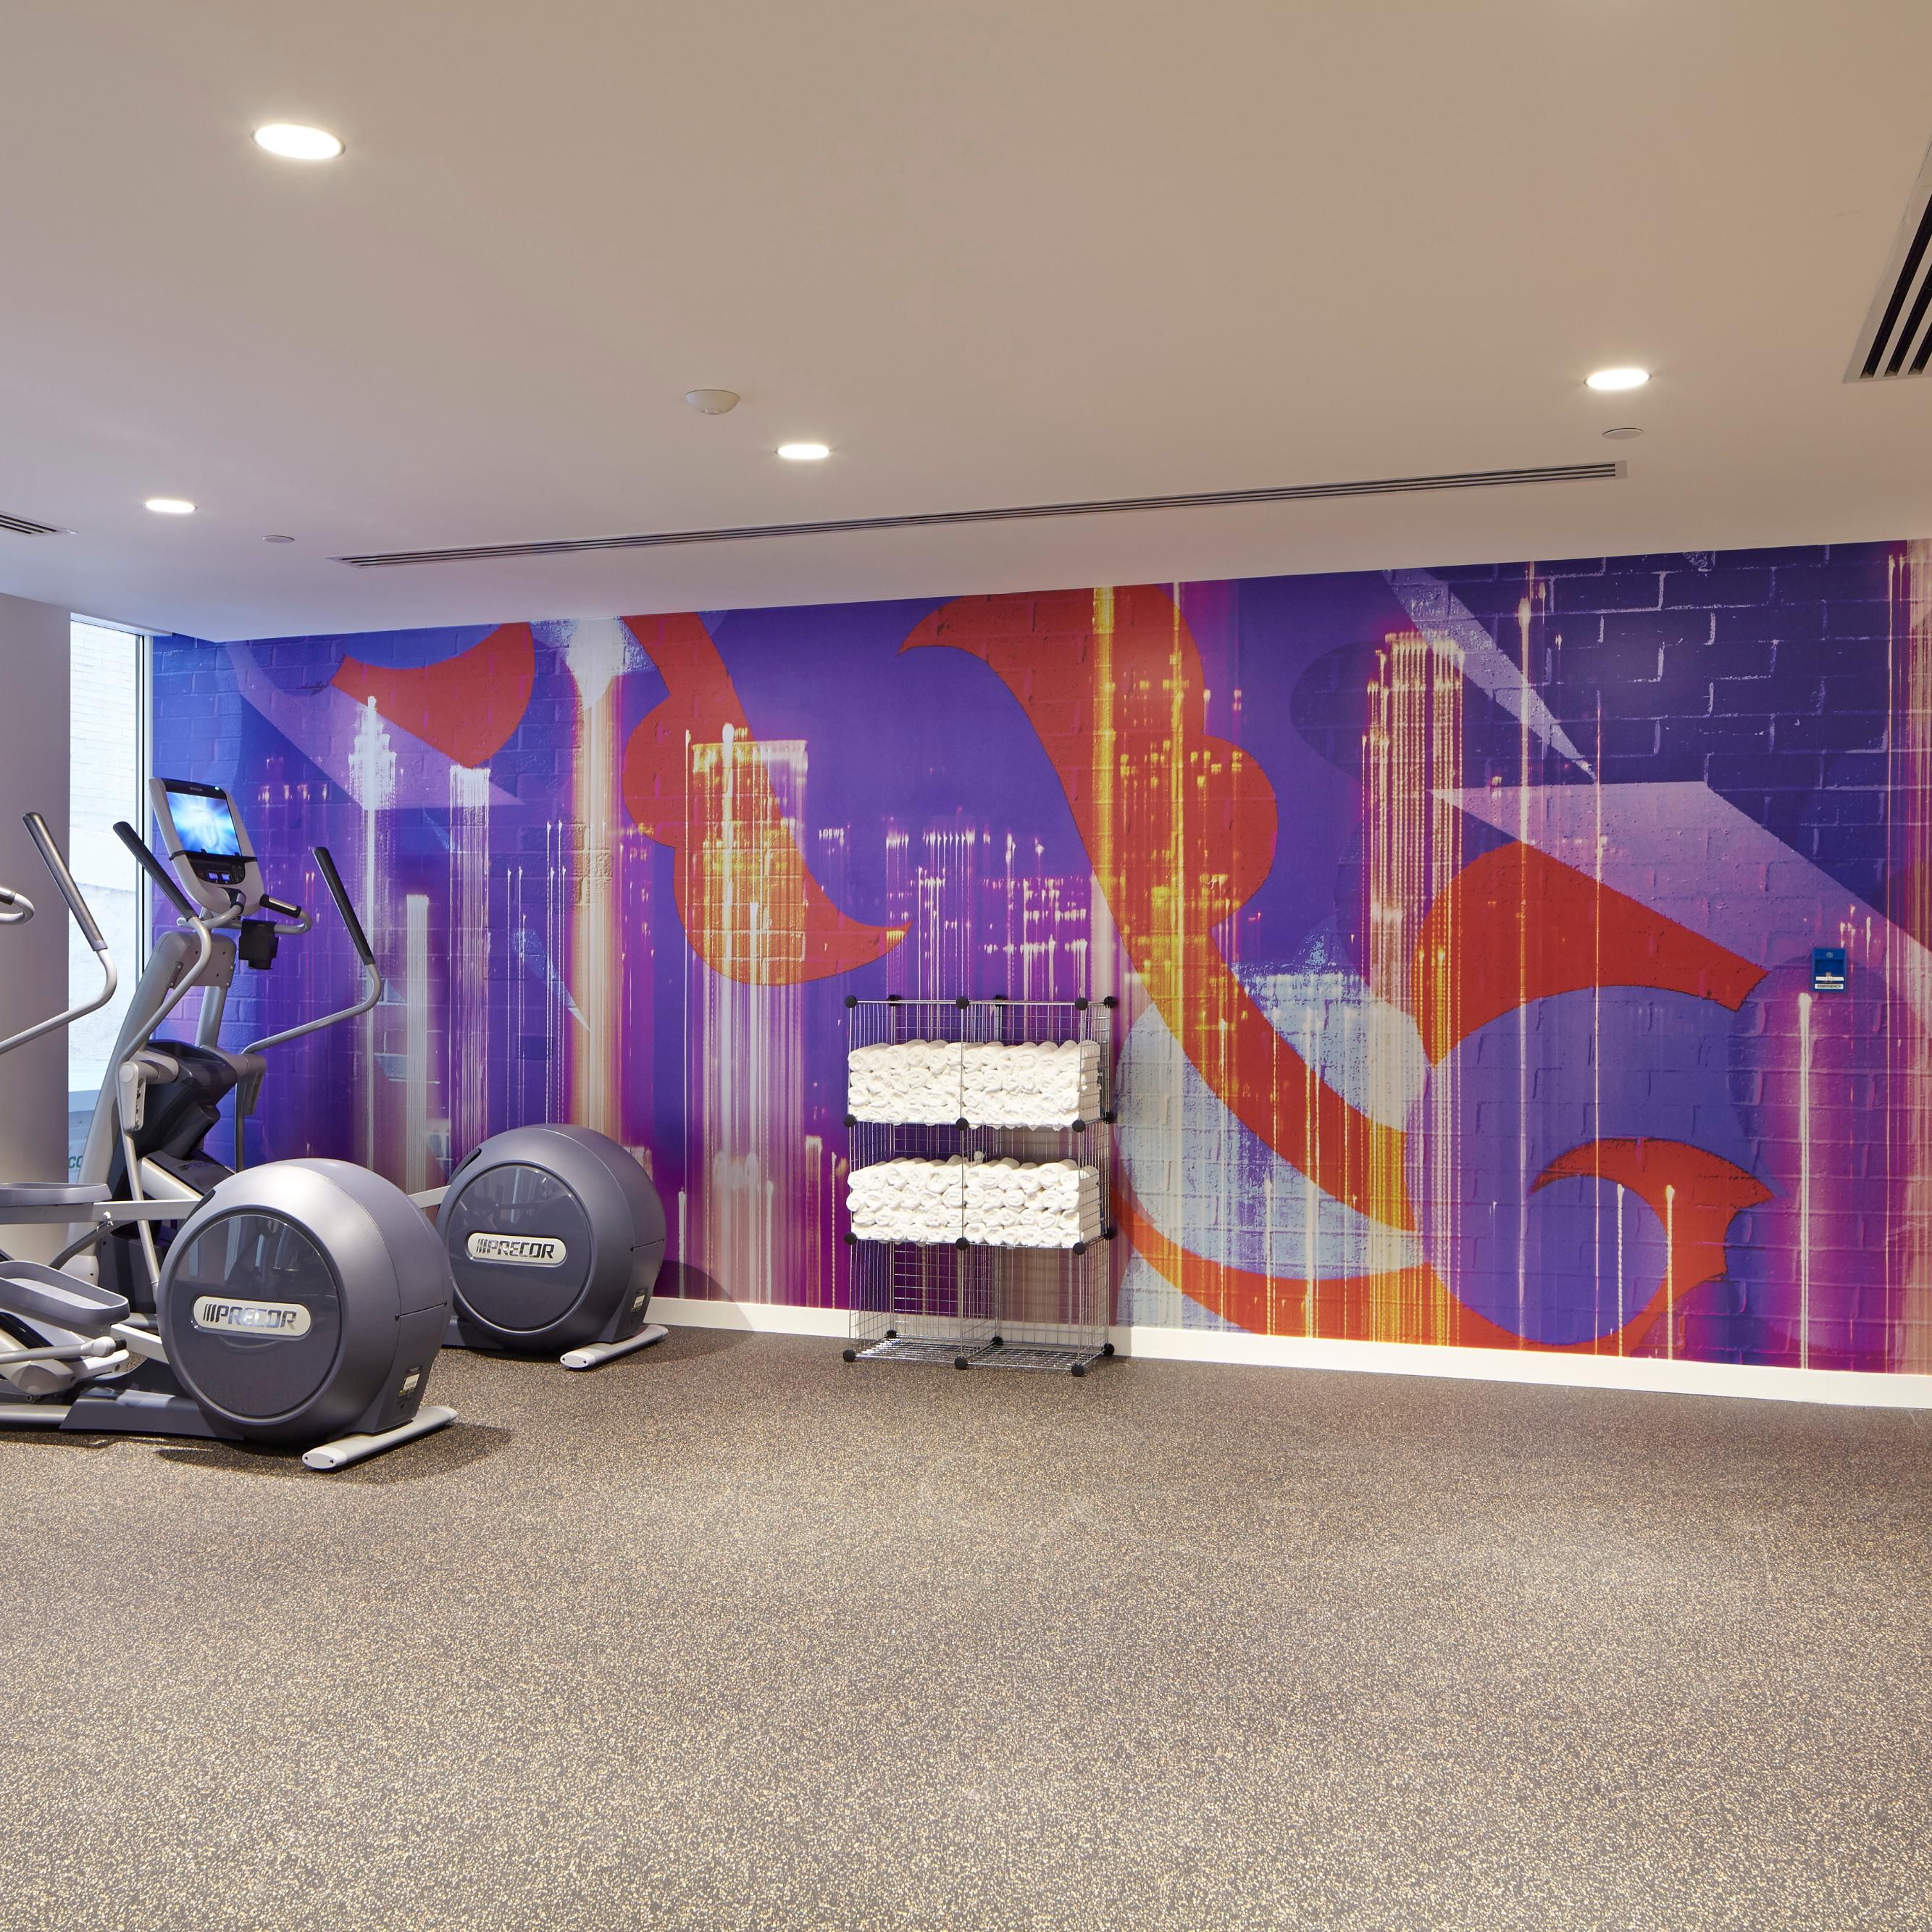 Work out on your terms, our Fitness Center is always open.